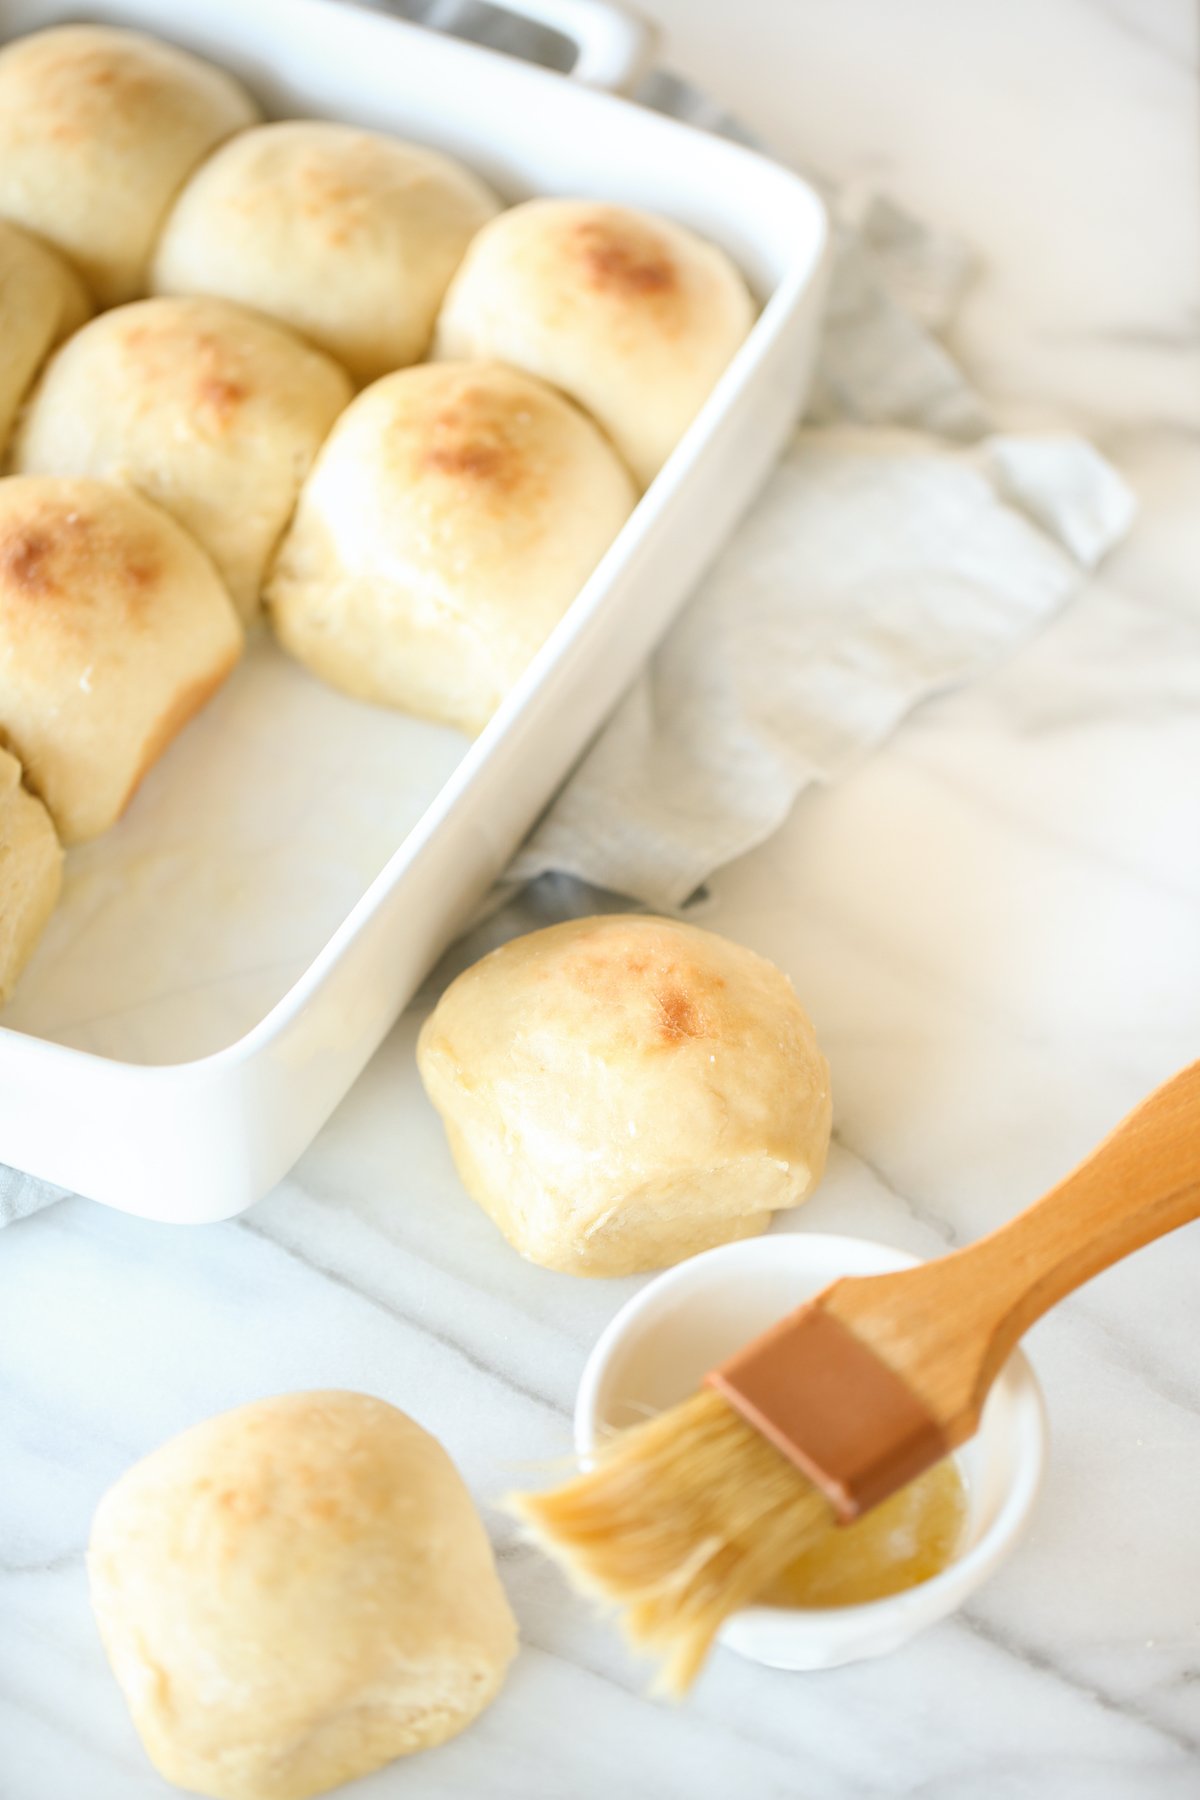 Dinner rolls in a white baking pant, with two in the foreground getting brushed with butter.